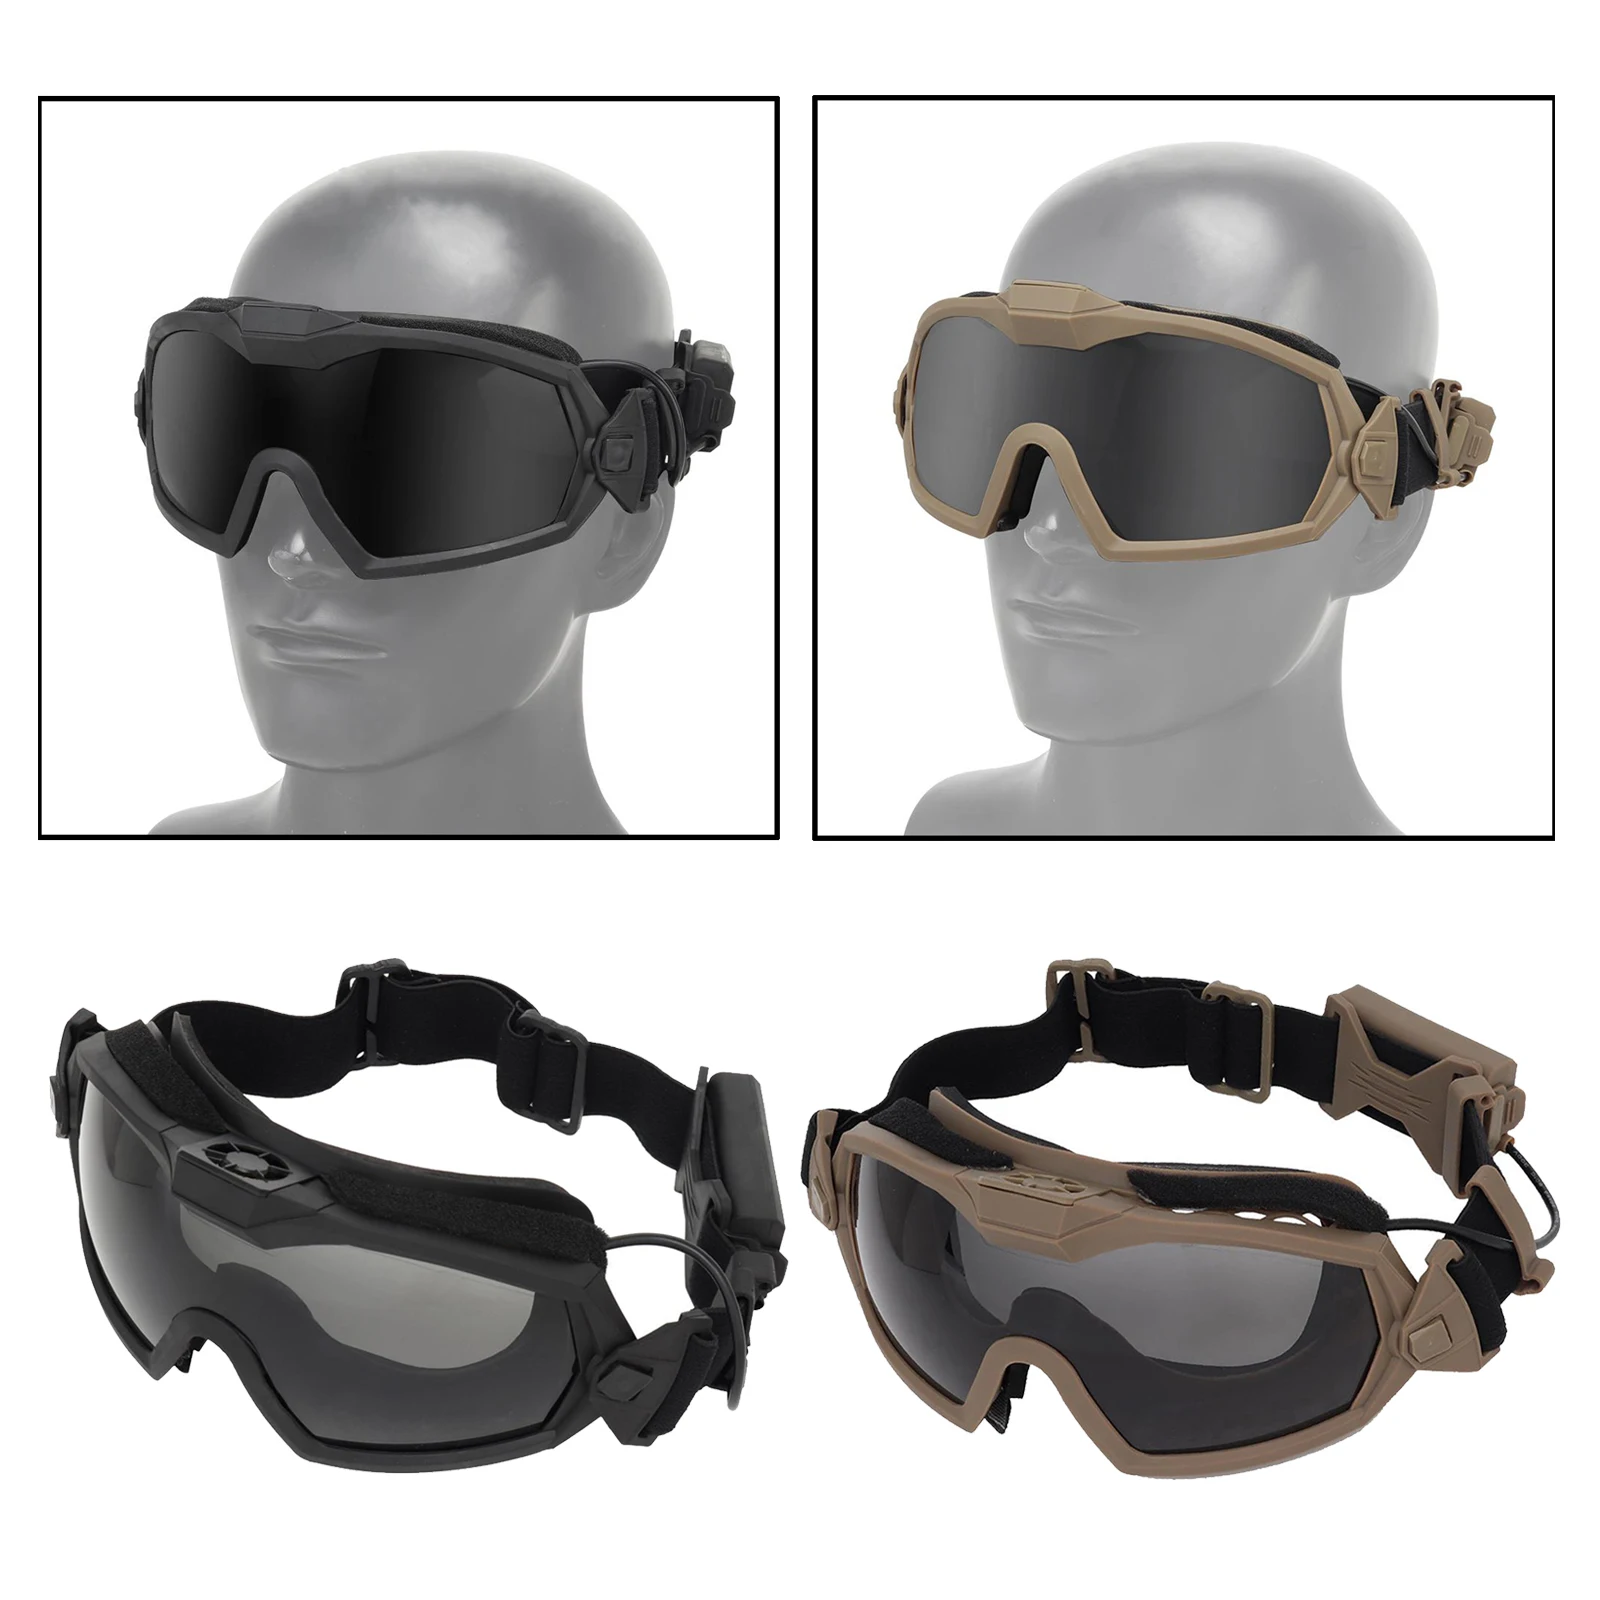 Outdoor Sports Goggles with 2 Lens UV400 Impact Resistance Shooting Goggles for Men Women Outdoors Cycling Hunting